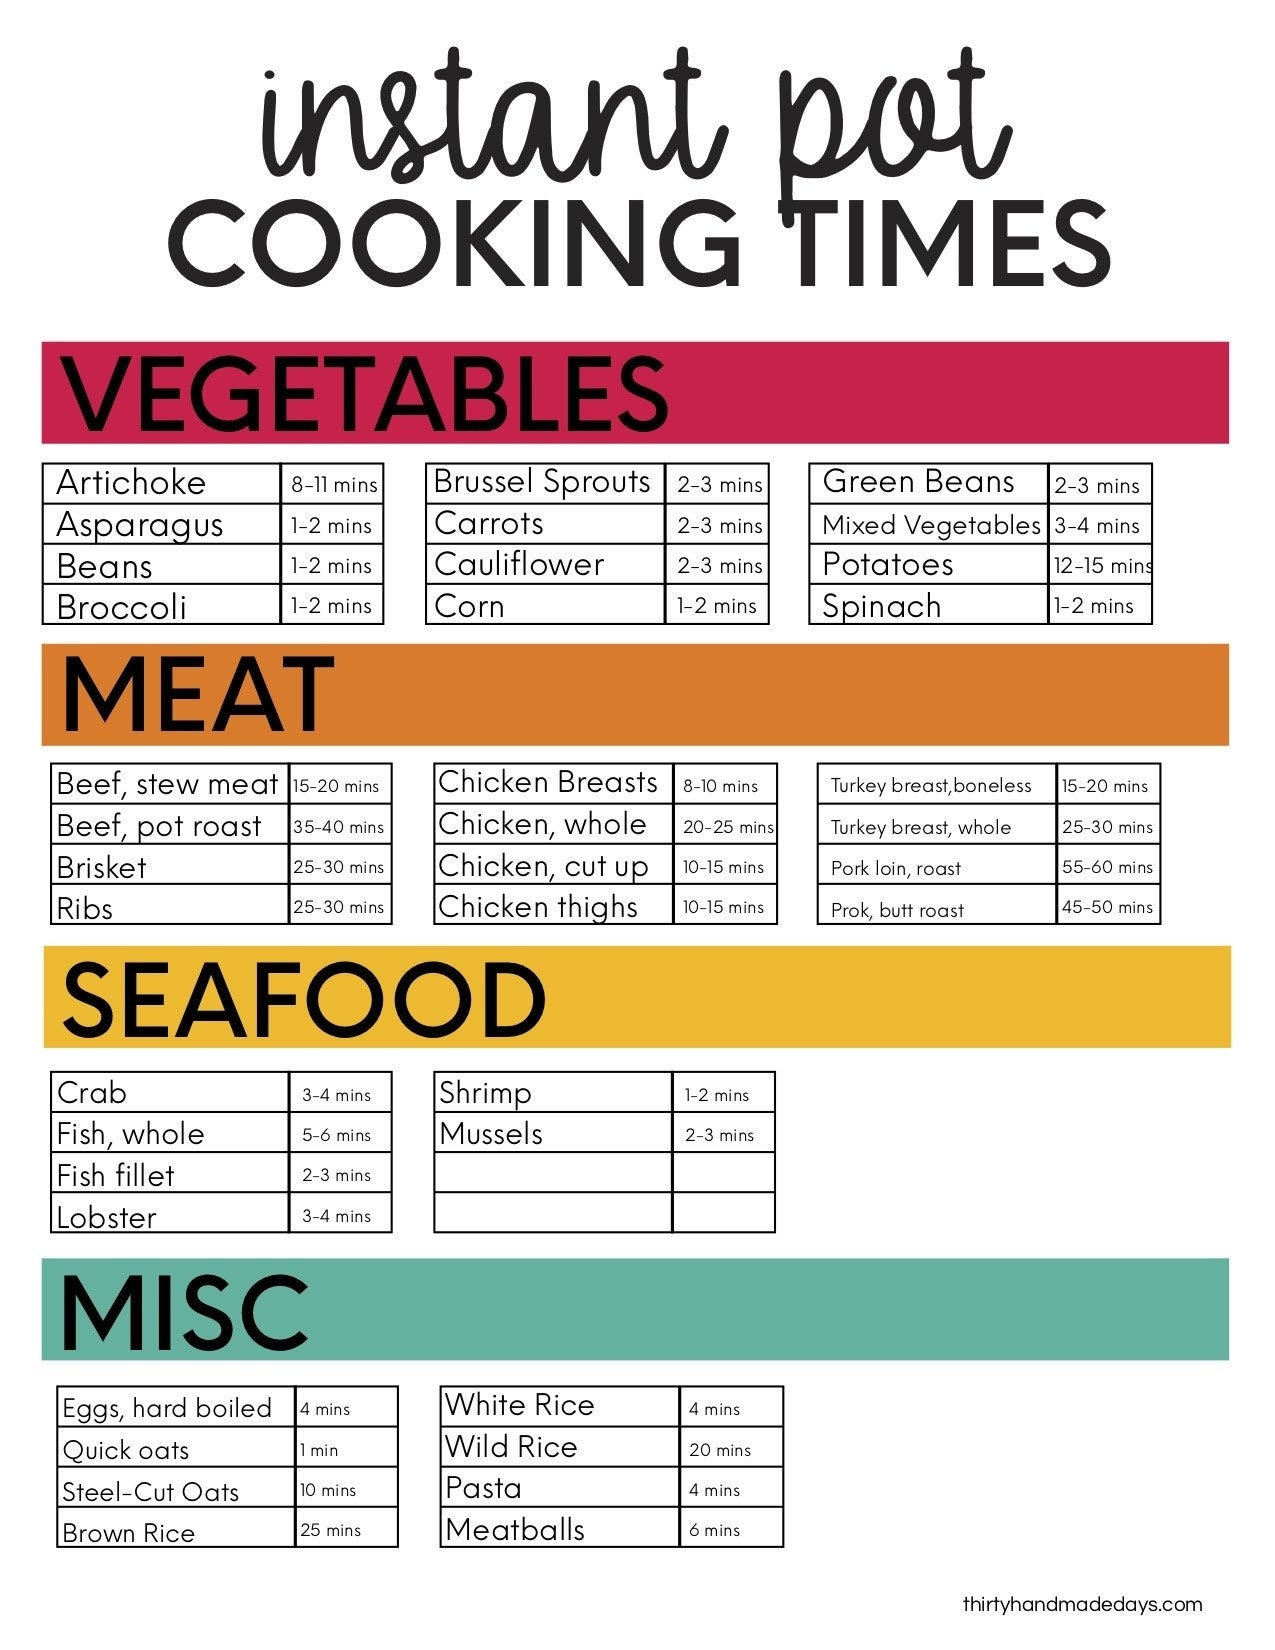 Instant Pot Cooking Times Cheat Sheet - Ditch the Wheat